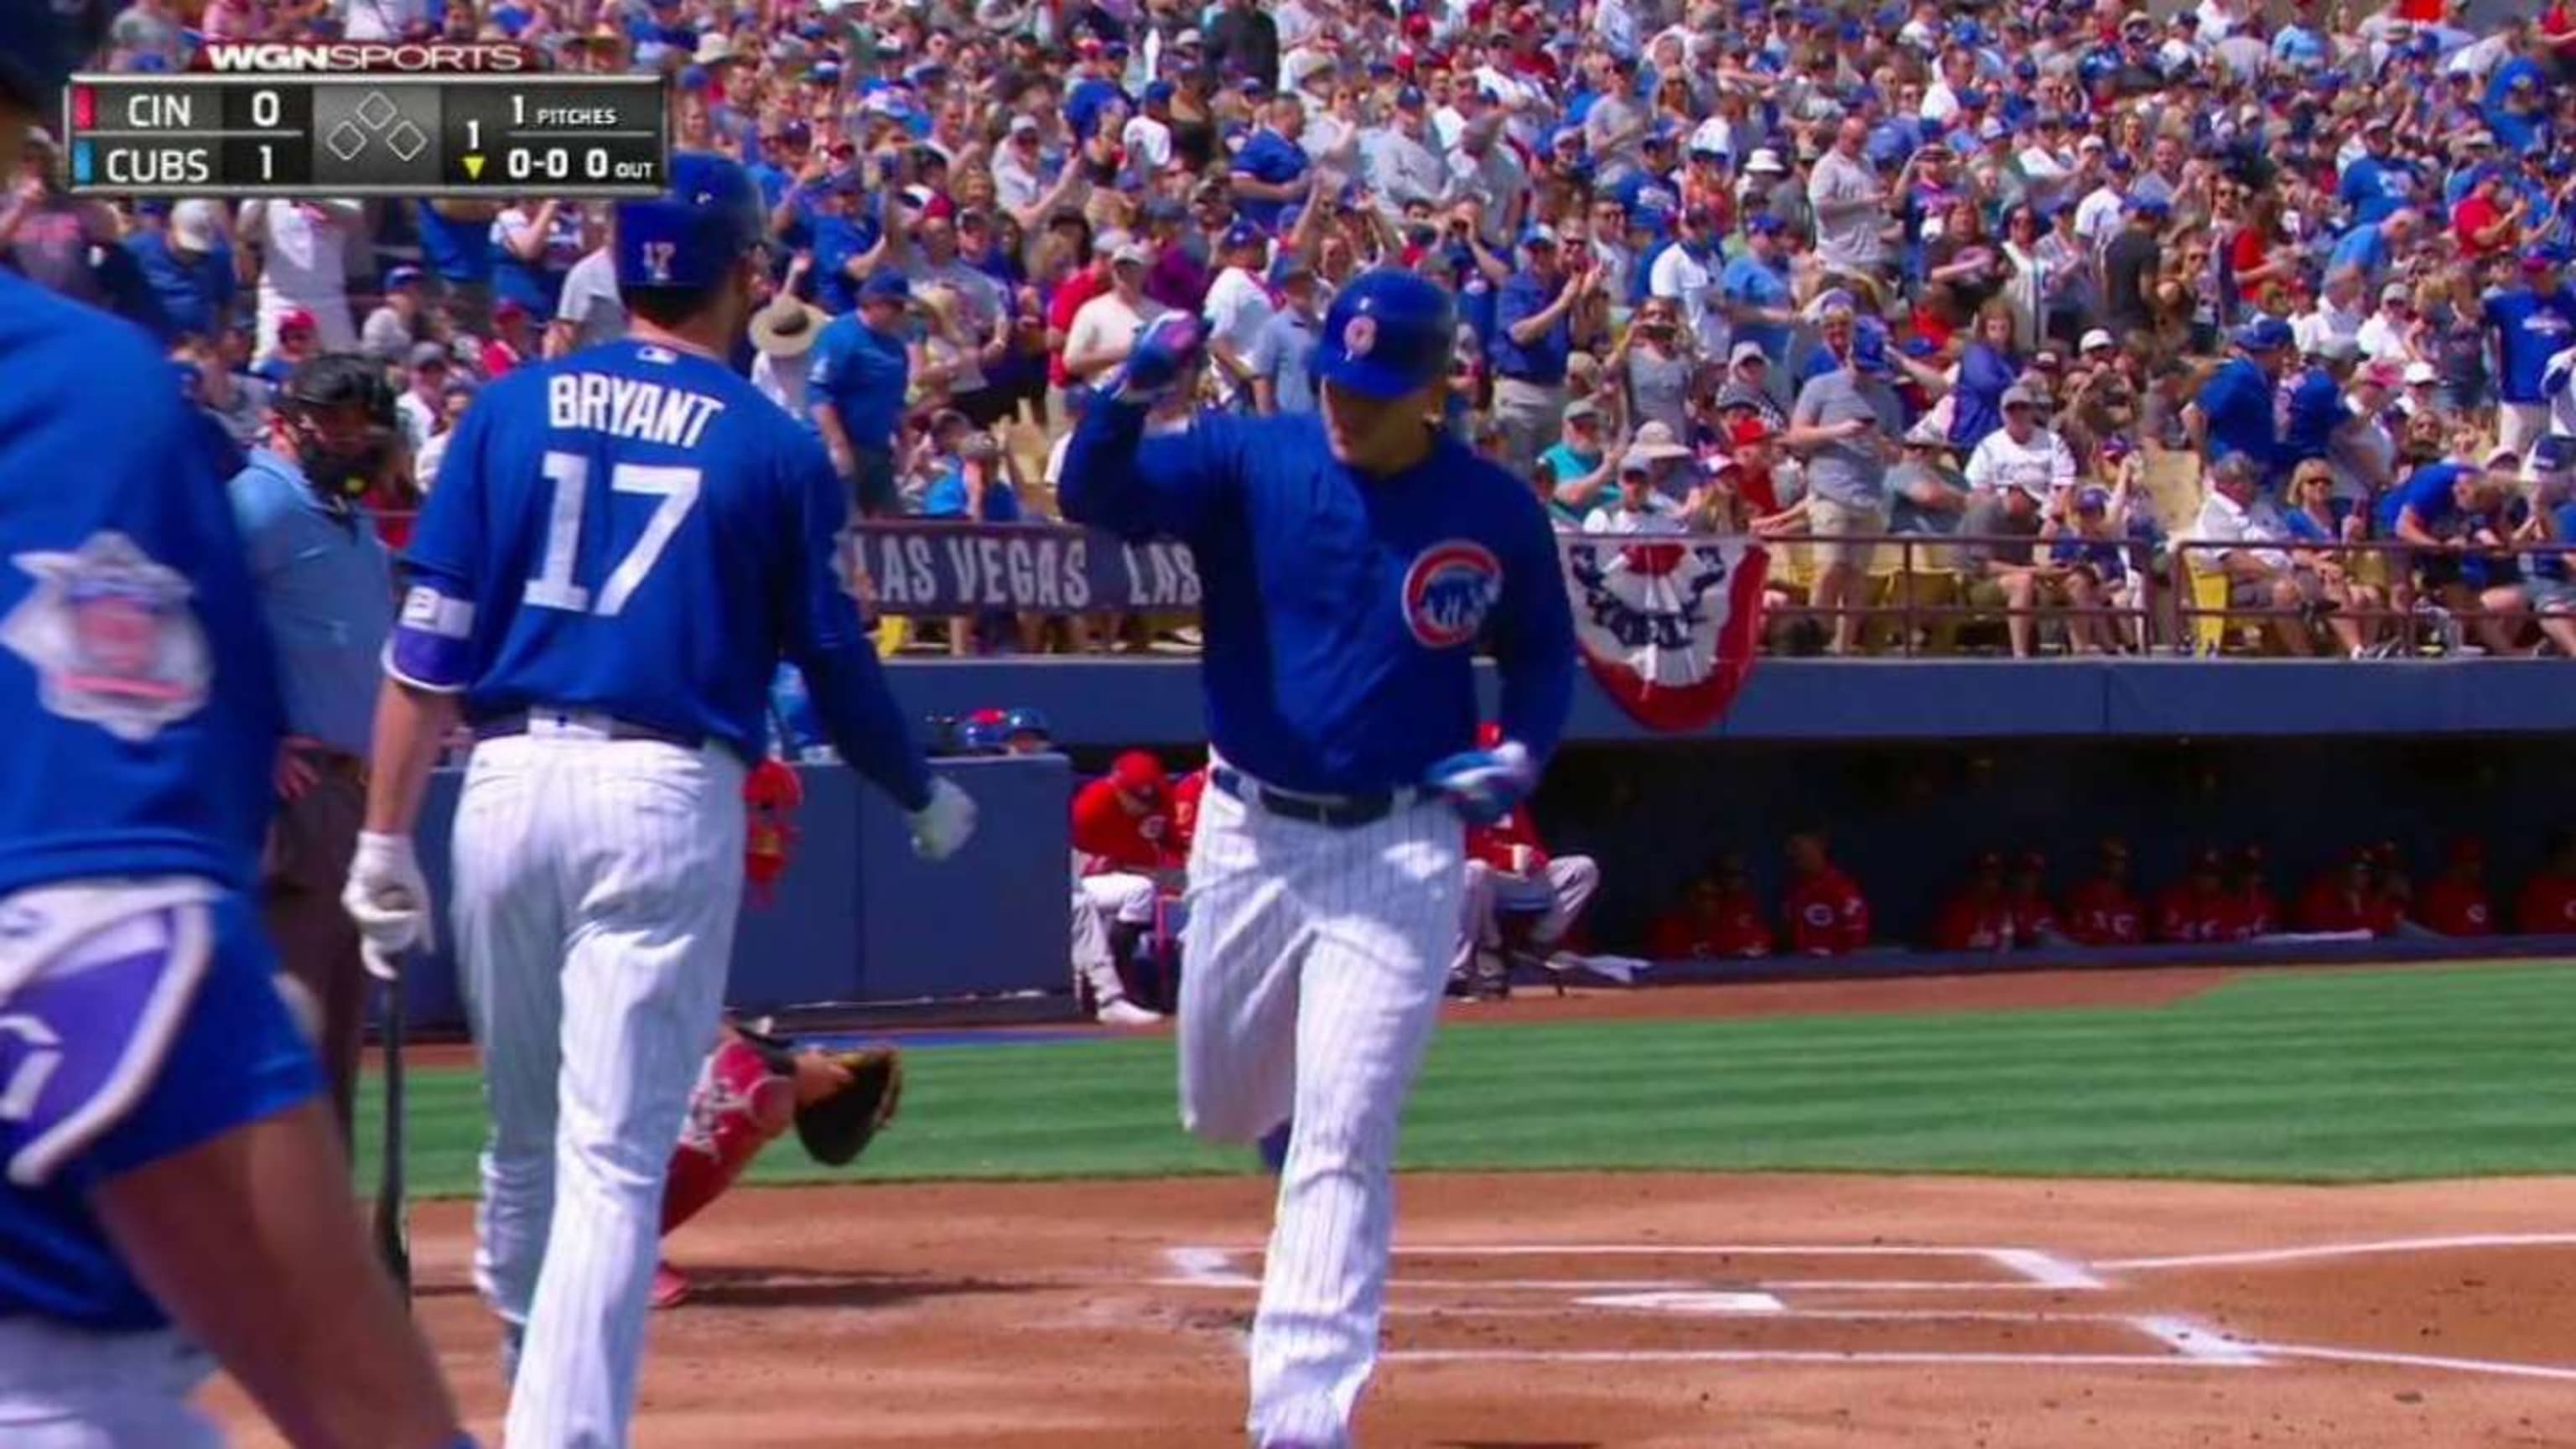 Anthony Rizzo volunteered to bat leadoff, then homered into